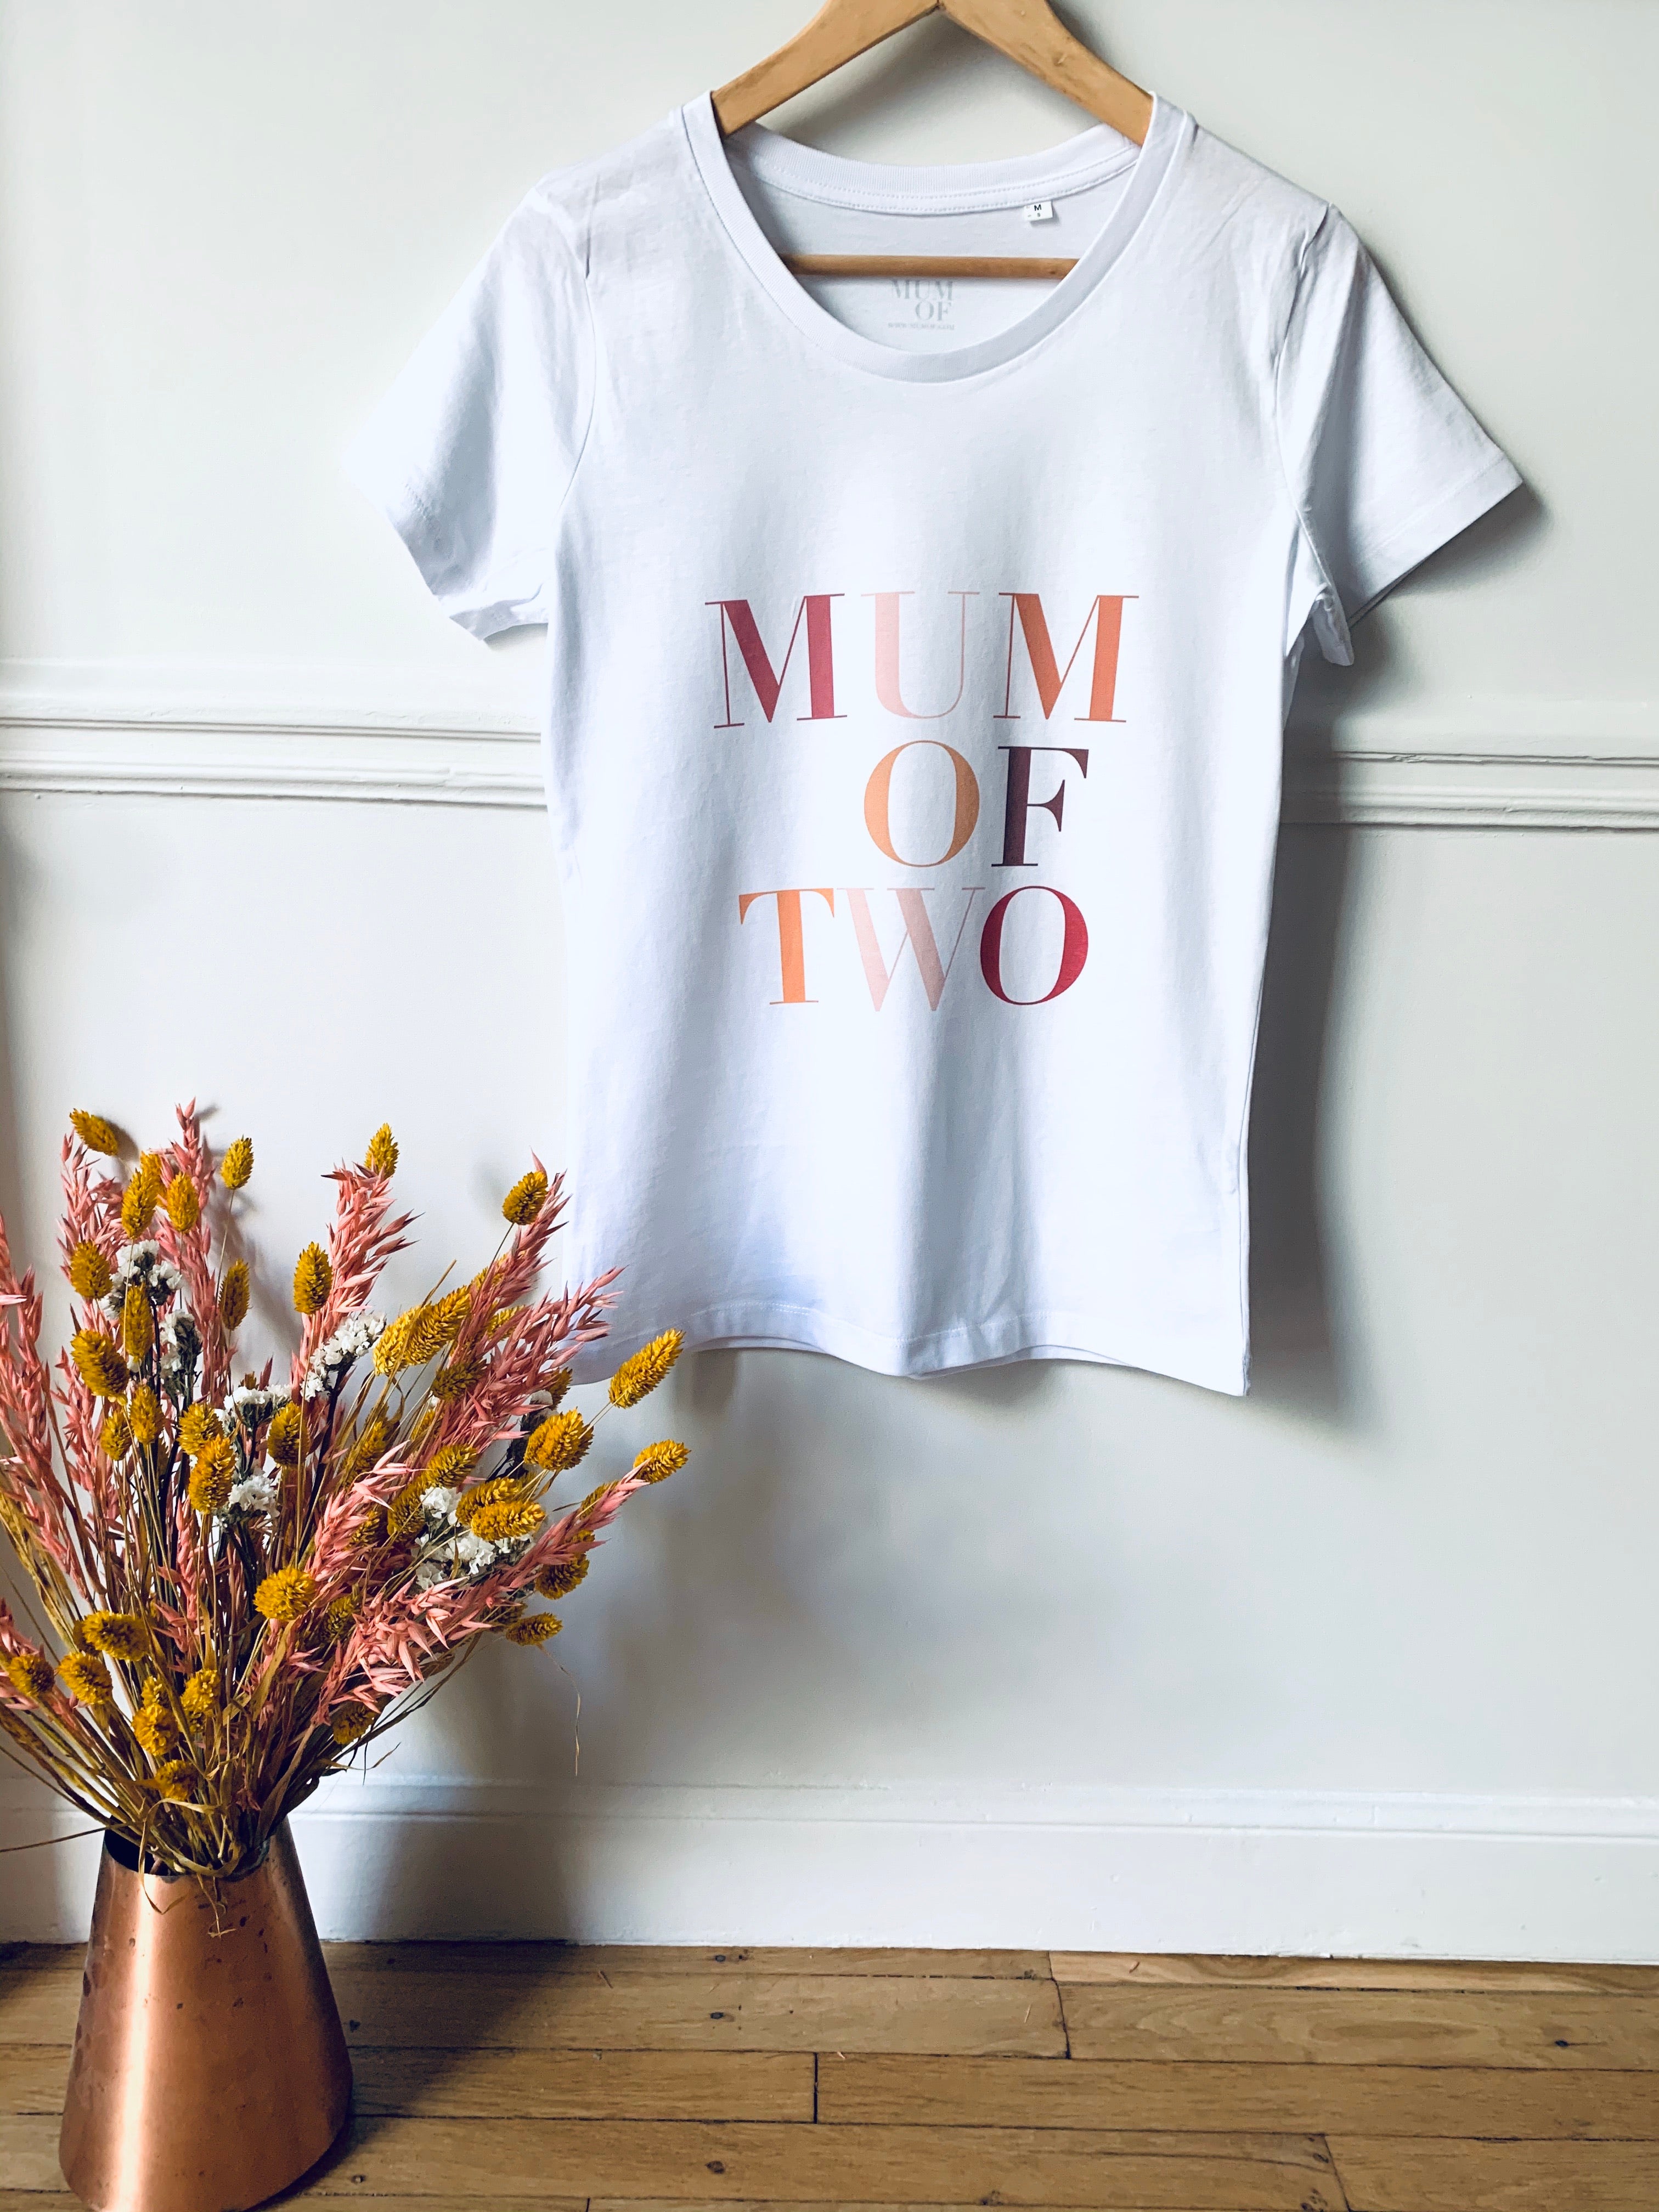 MUM OF TWO LIMITED EDITION T-SHIRT